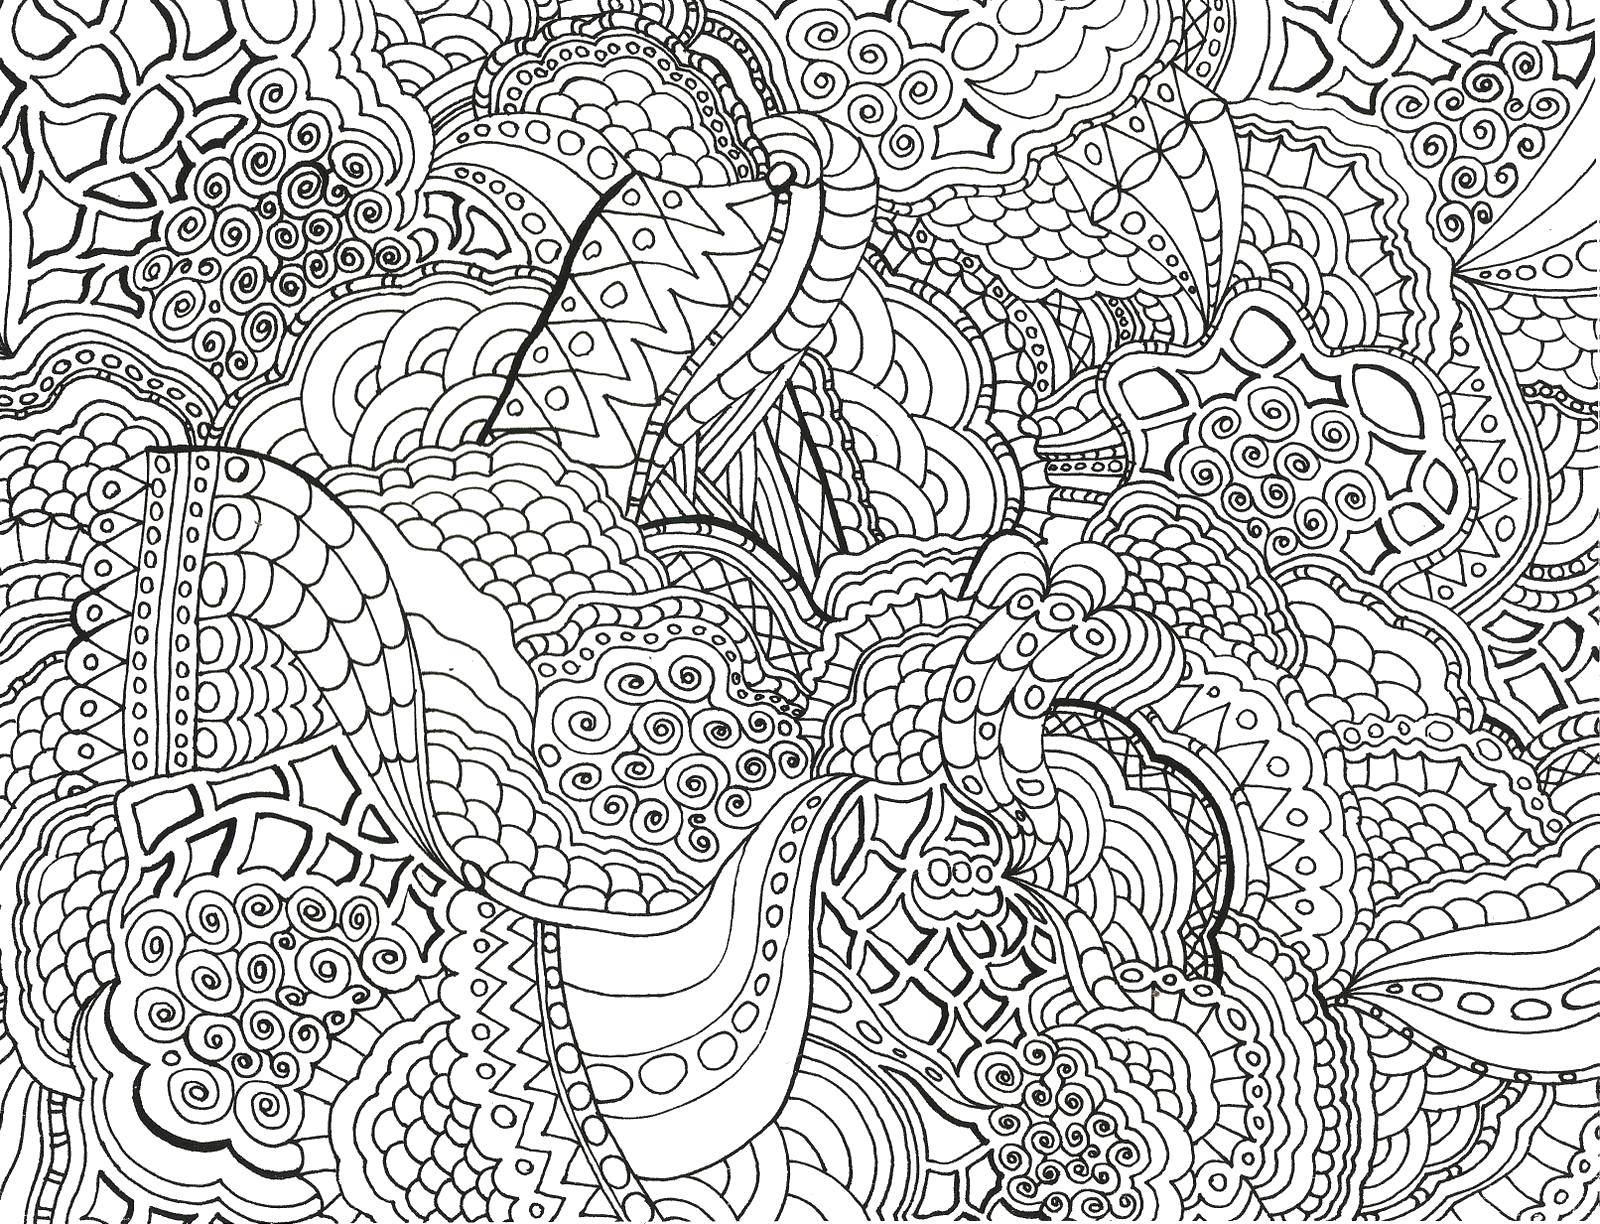 Coloring Small patterns. Category Sophisticated design. Tags:  Patterns, geometric.